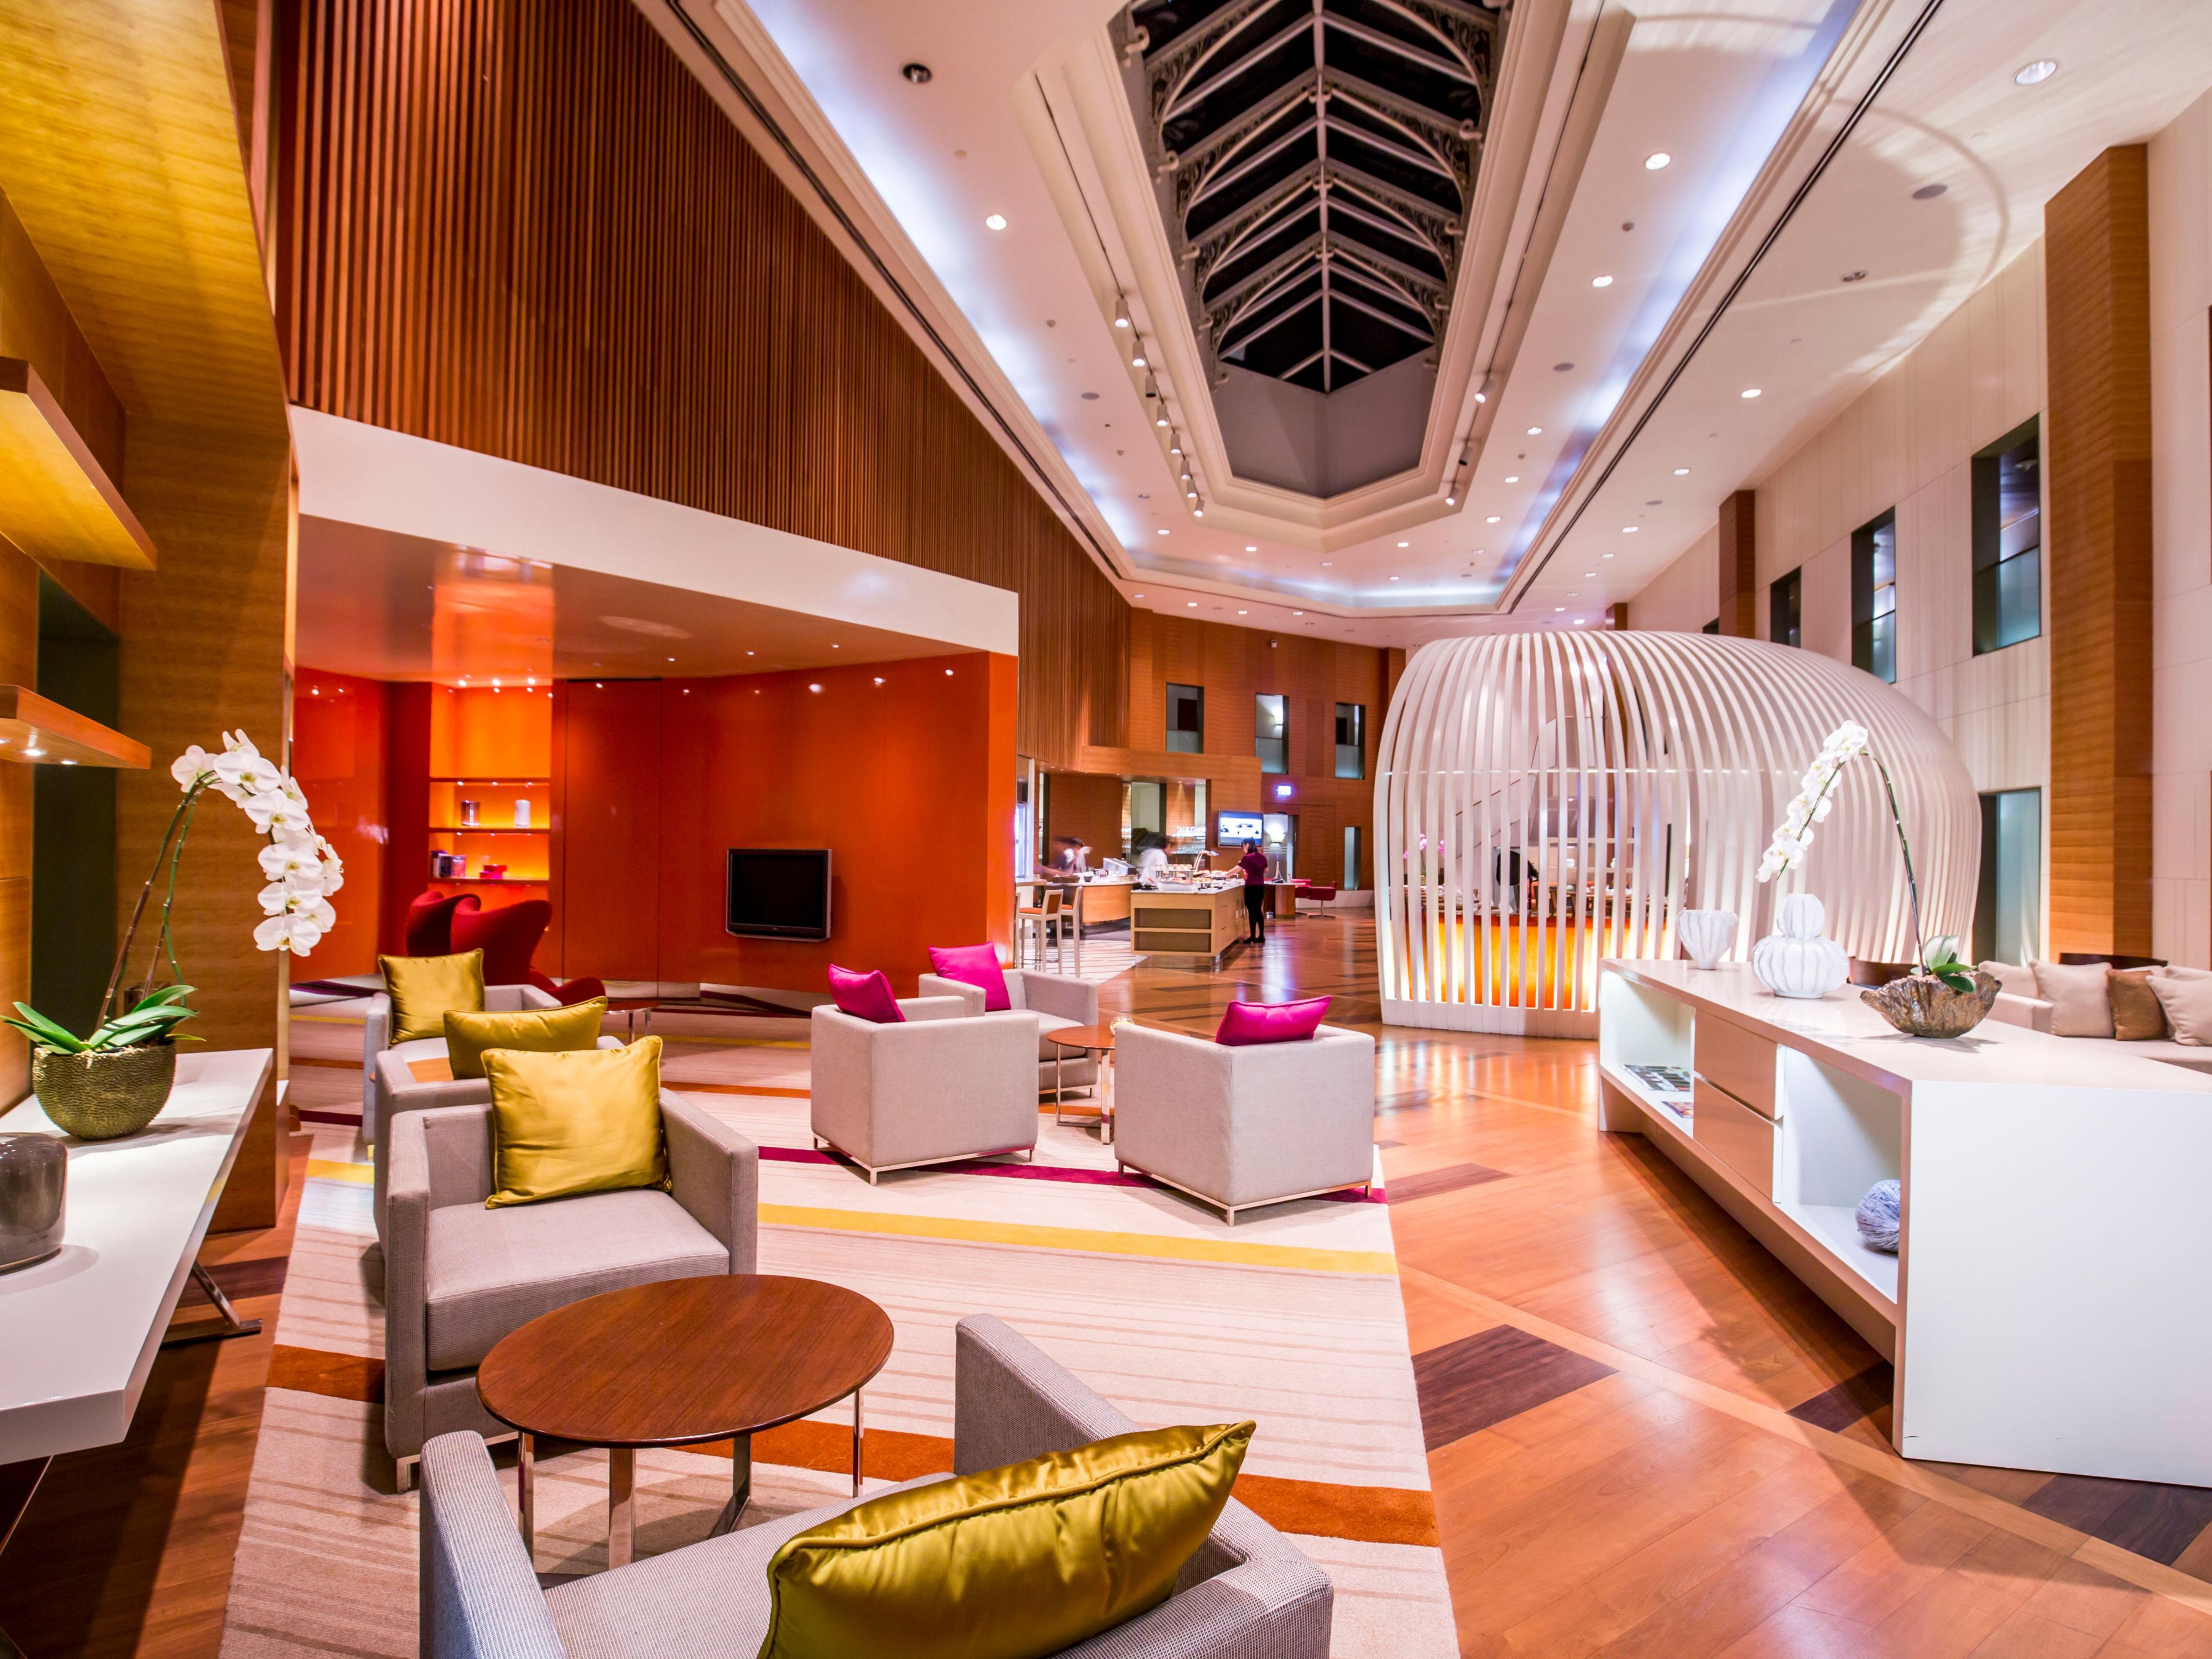 At Crowne Plaza Bangkok Lumpini Park, we provide a range of exclusive privileges that will make your stay completely worthwhile when you choose to stay in the Club rooms or upgrade your stay to include club Lounge benefits.